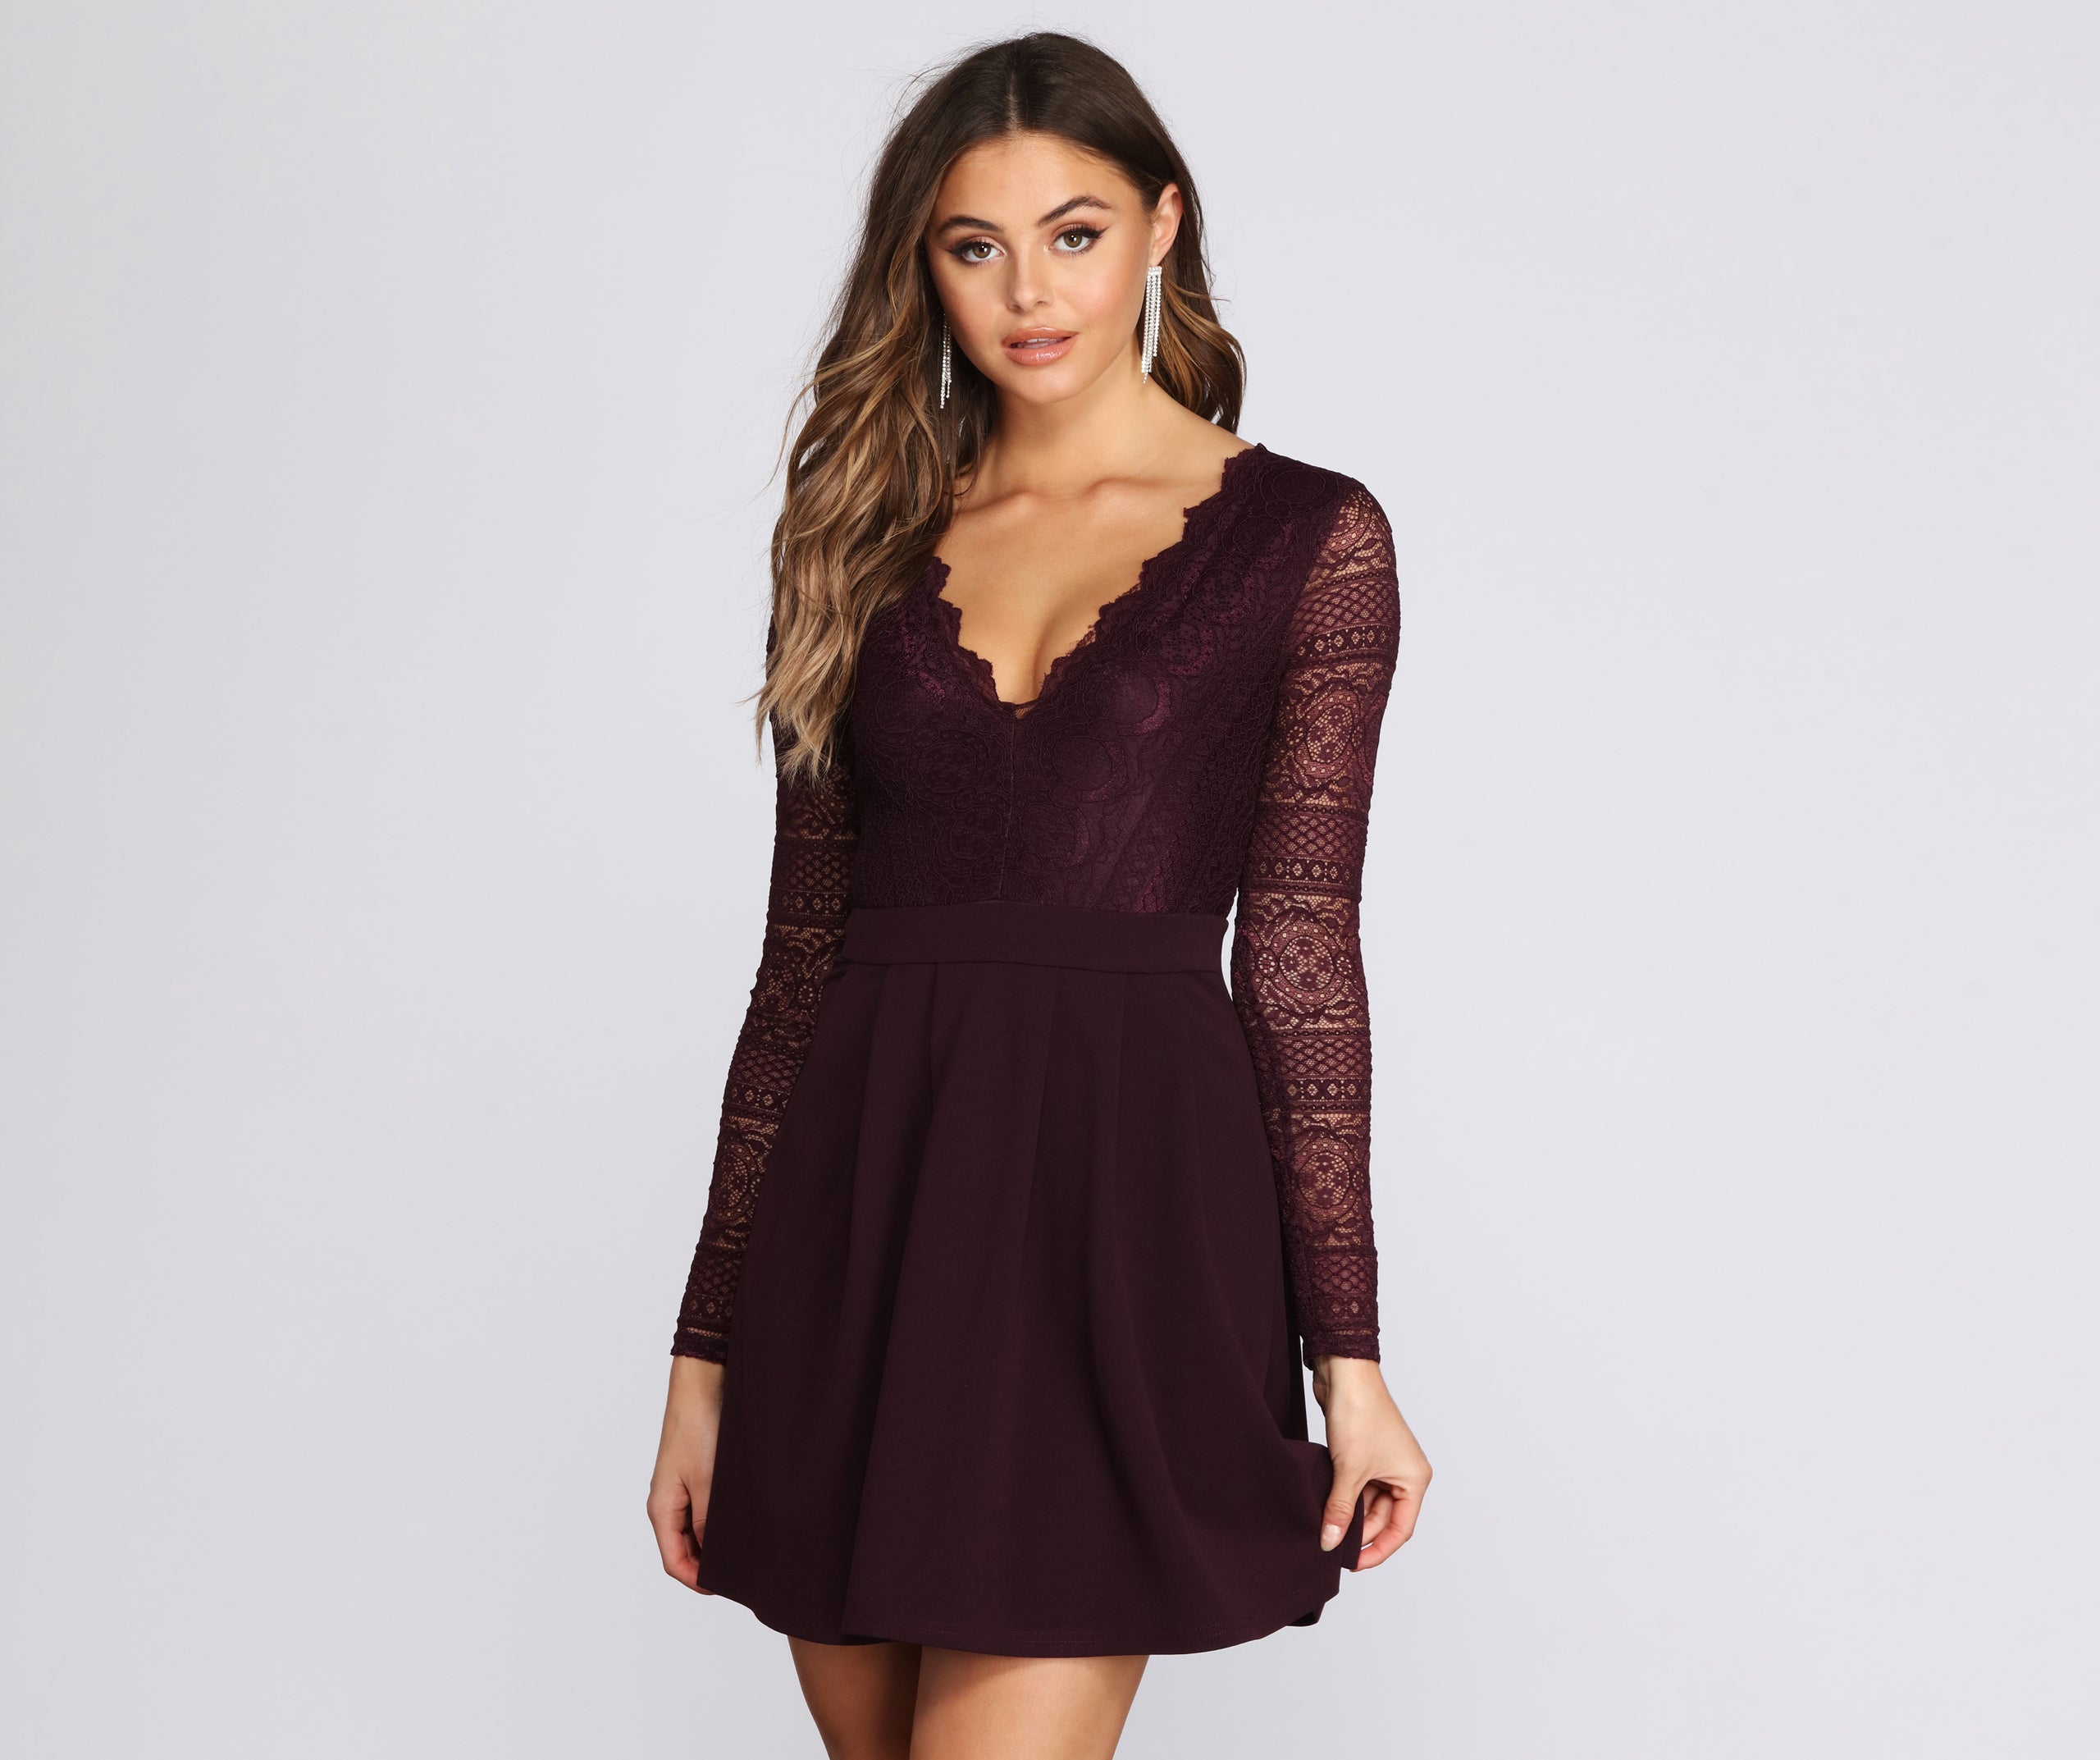 lace obsession skater dress